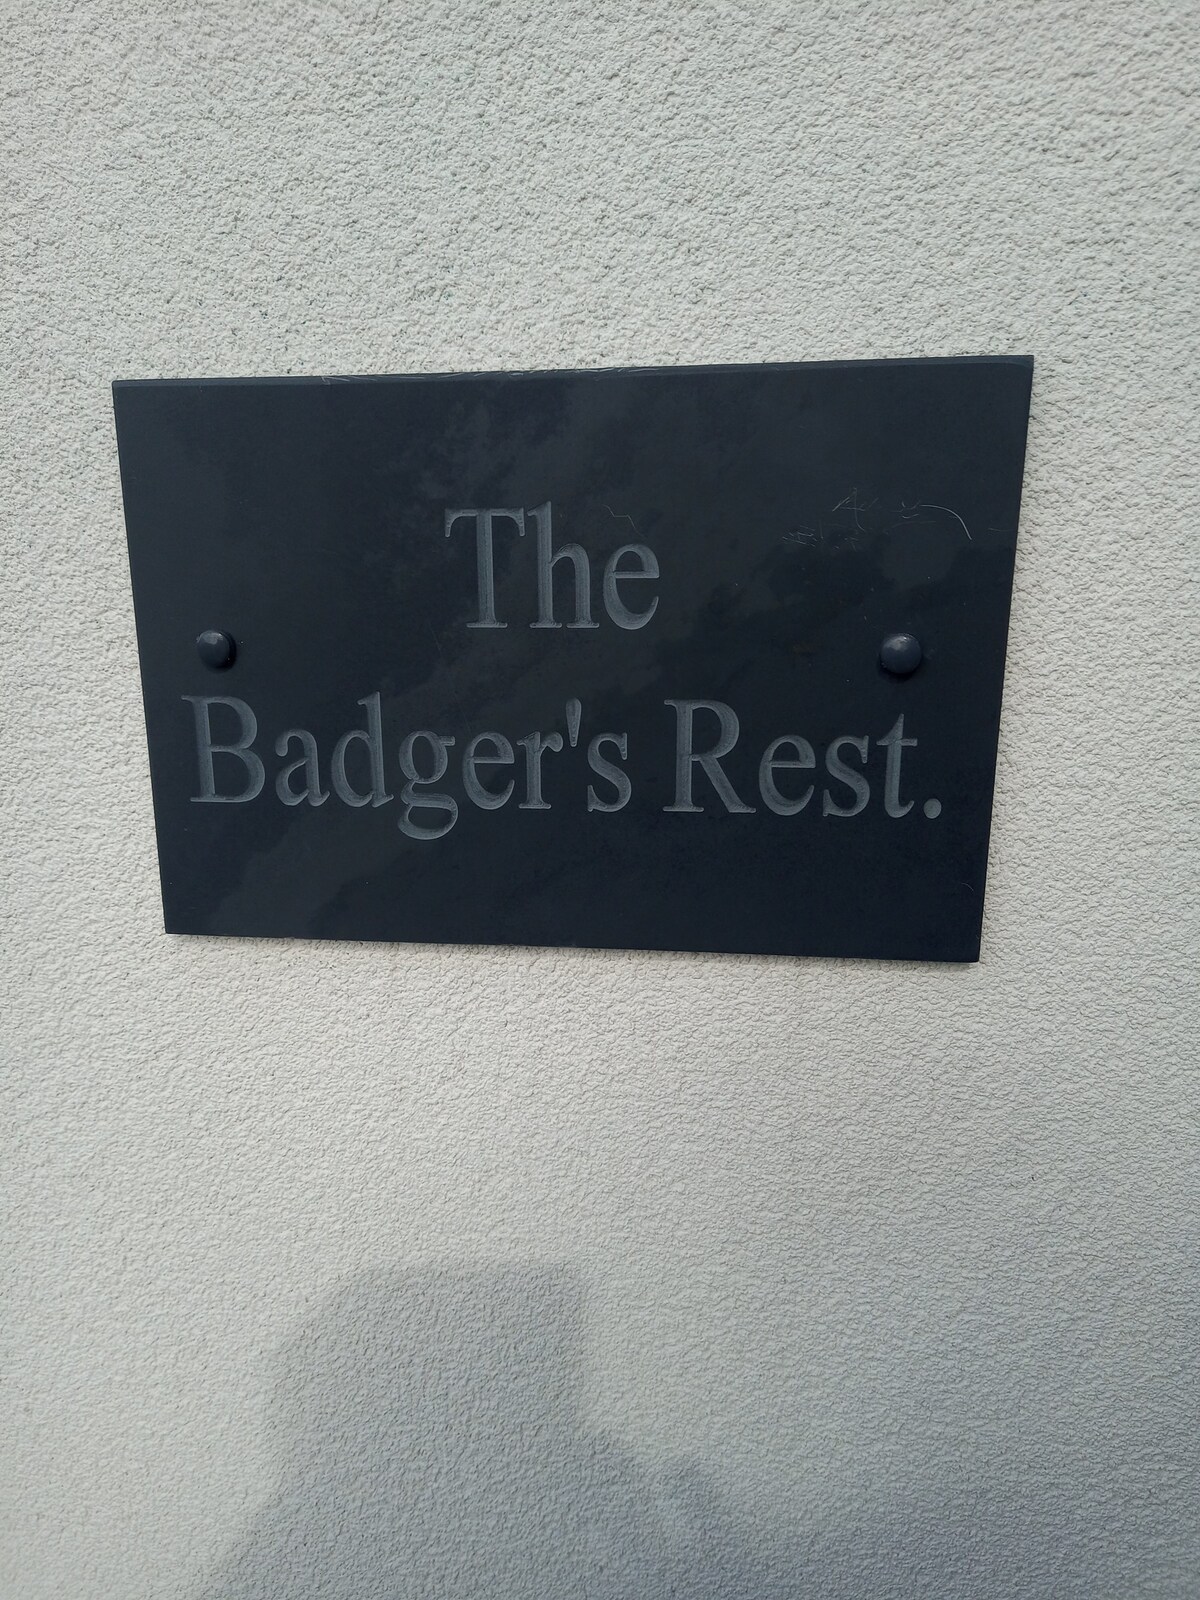 The Badgers rest.